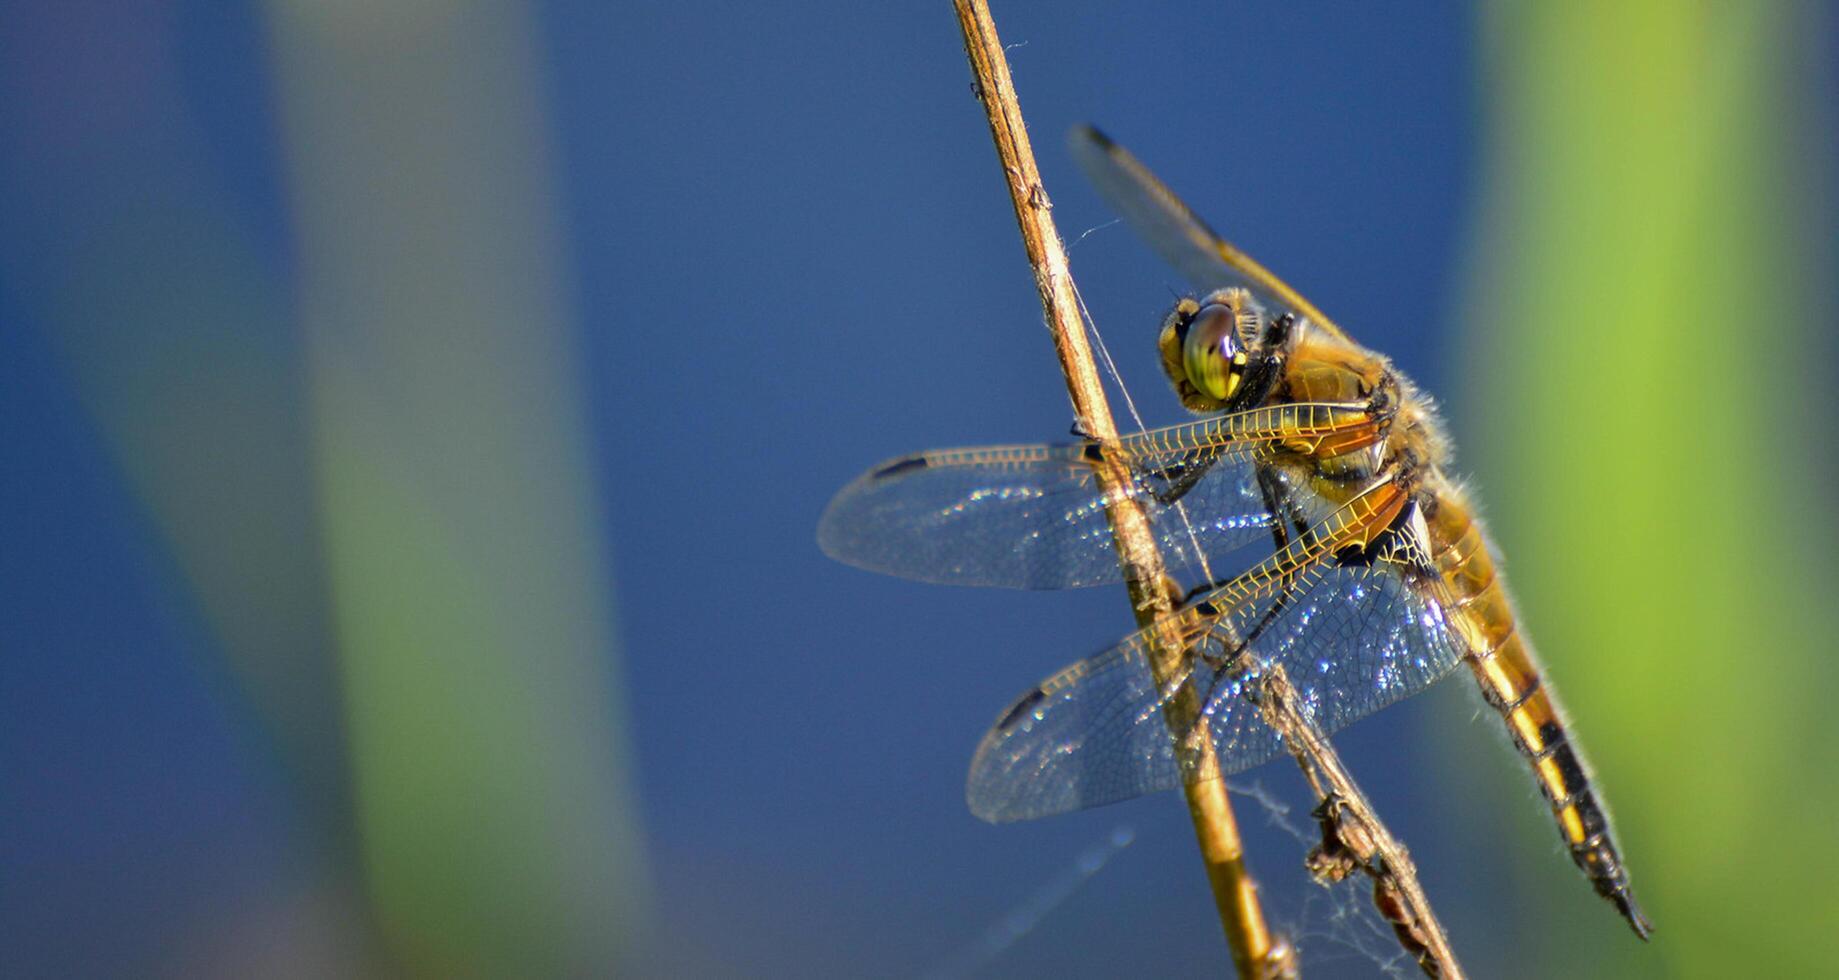 Dragonfly Photography, closeup shot of a dragonfly in the natural environment photo